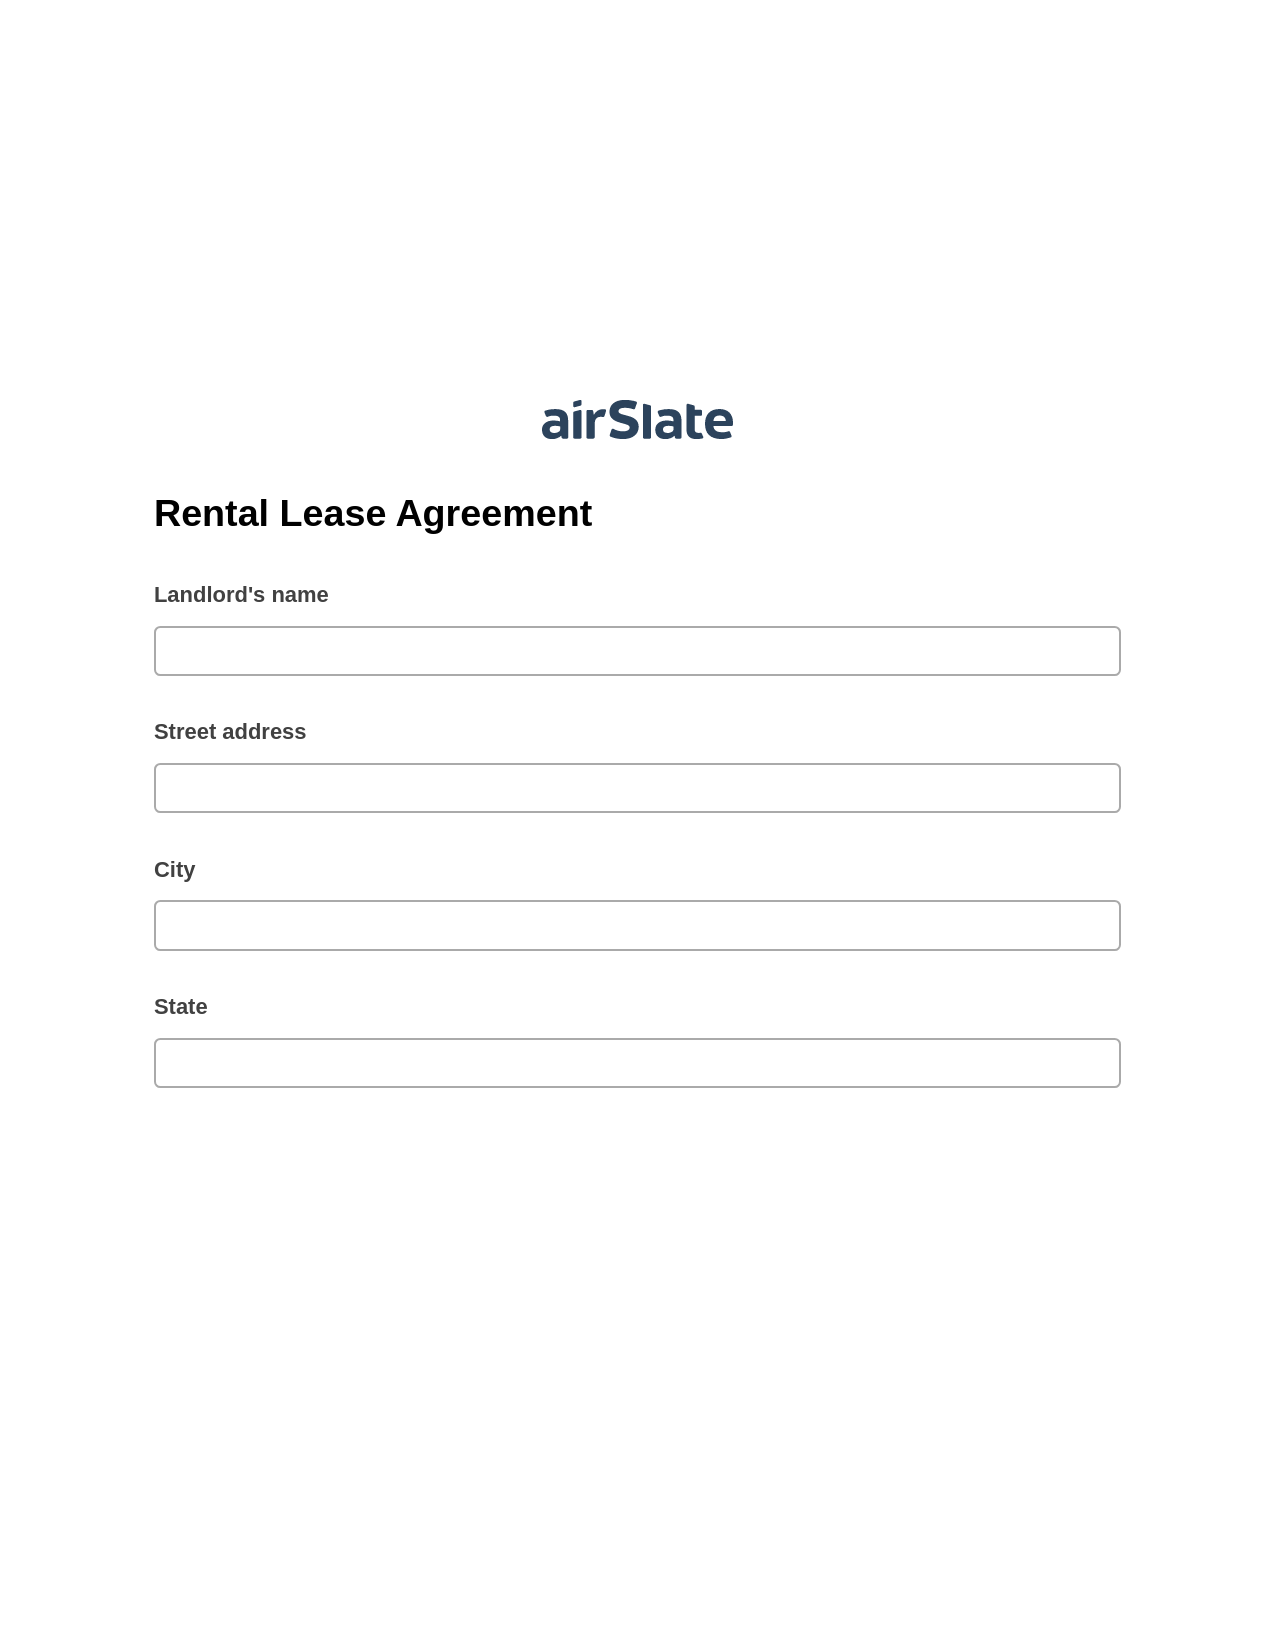 Multirole Rental Lease Agreement Pre-fill from Excel Spreadsheet Dropdown Options Bot, Send a Slate to MS Dynamics 365 Contact Bot, Archive to SharePoint Folder Bot